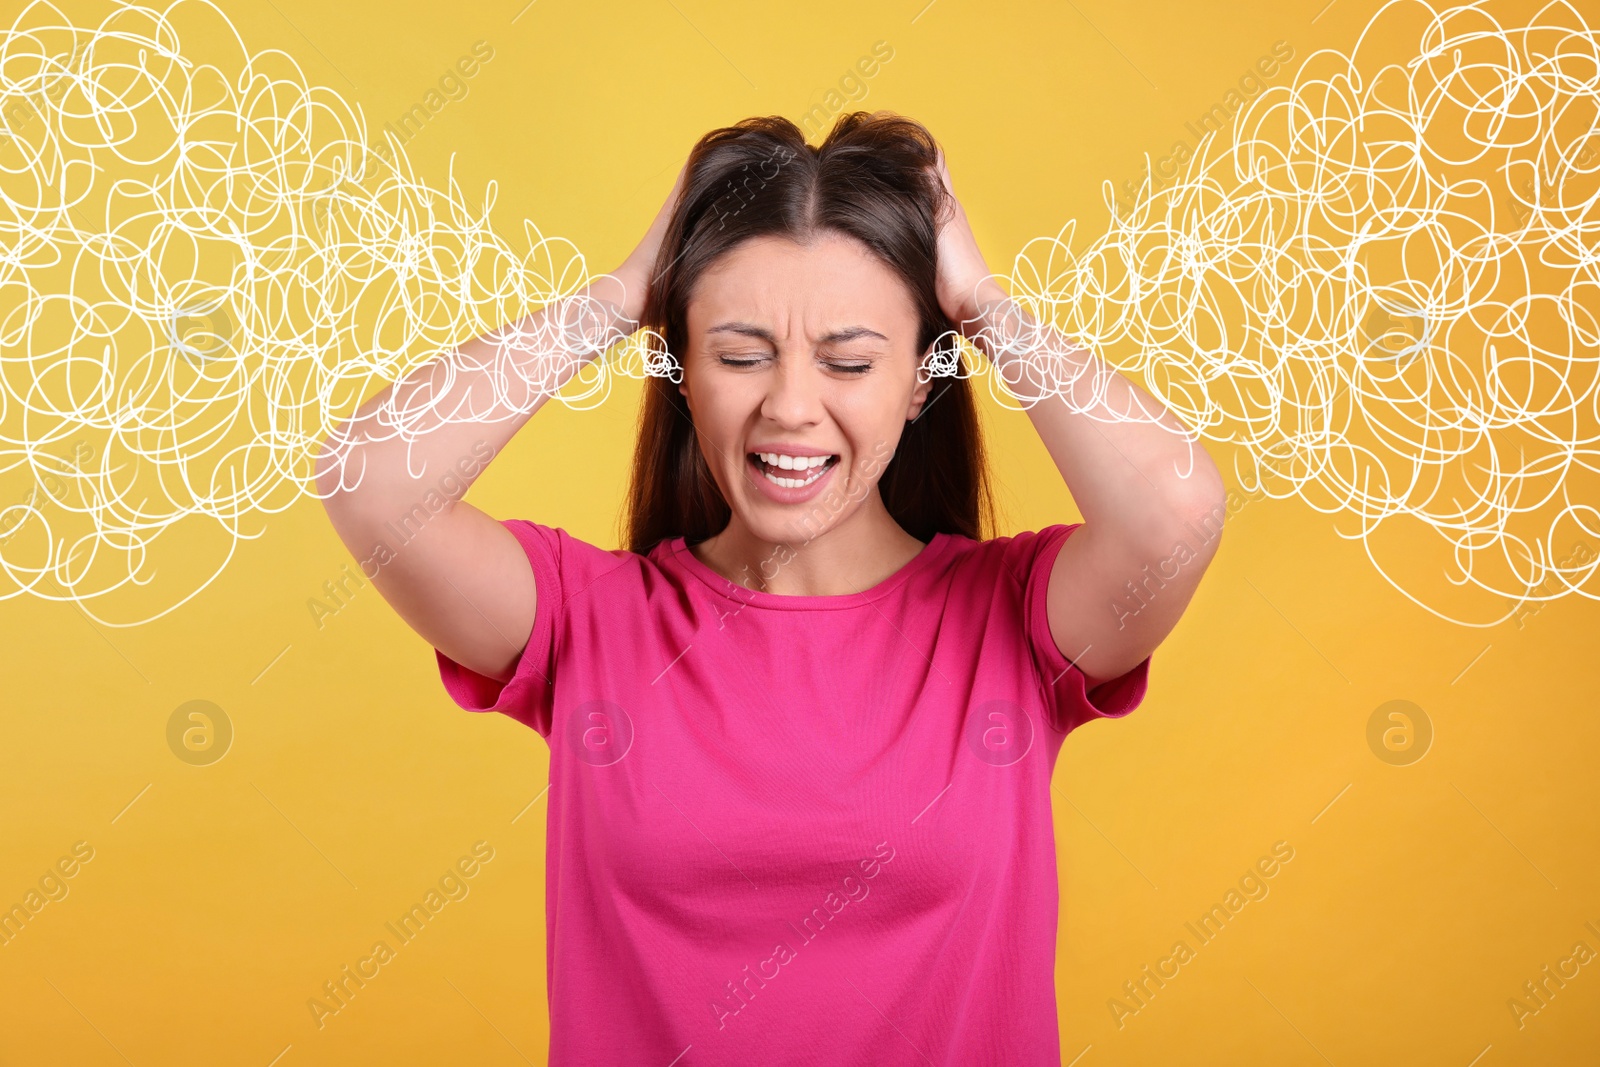 Image of Stressed and upset young woman on yellow background